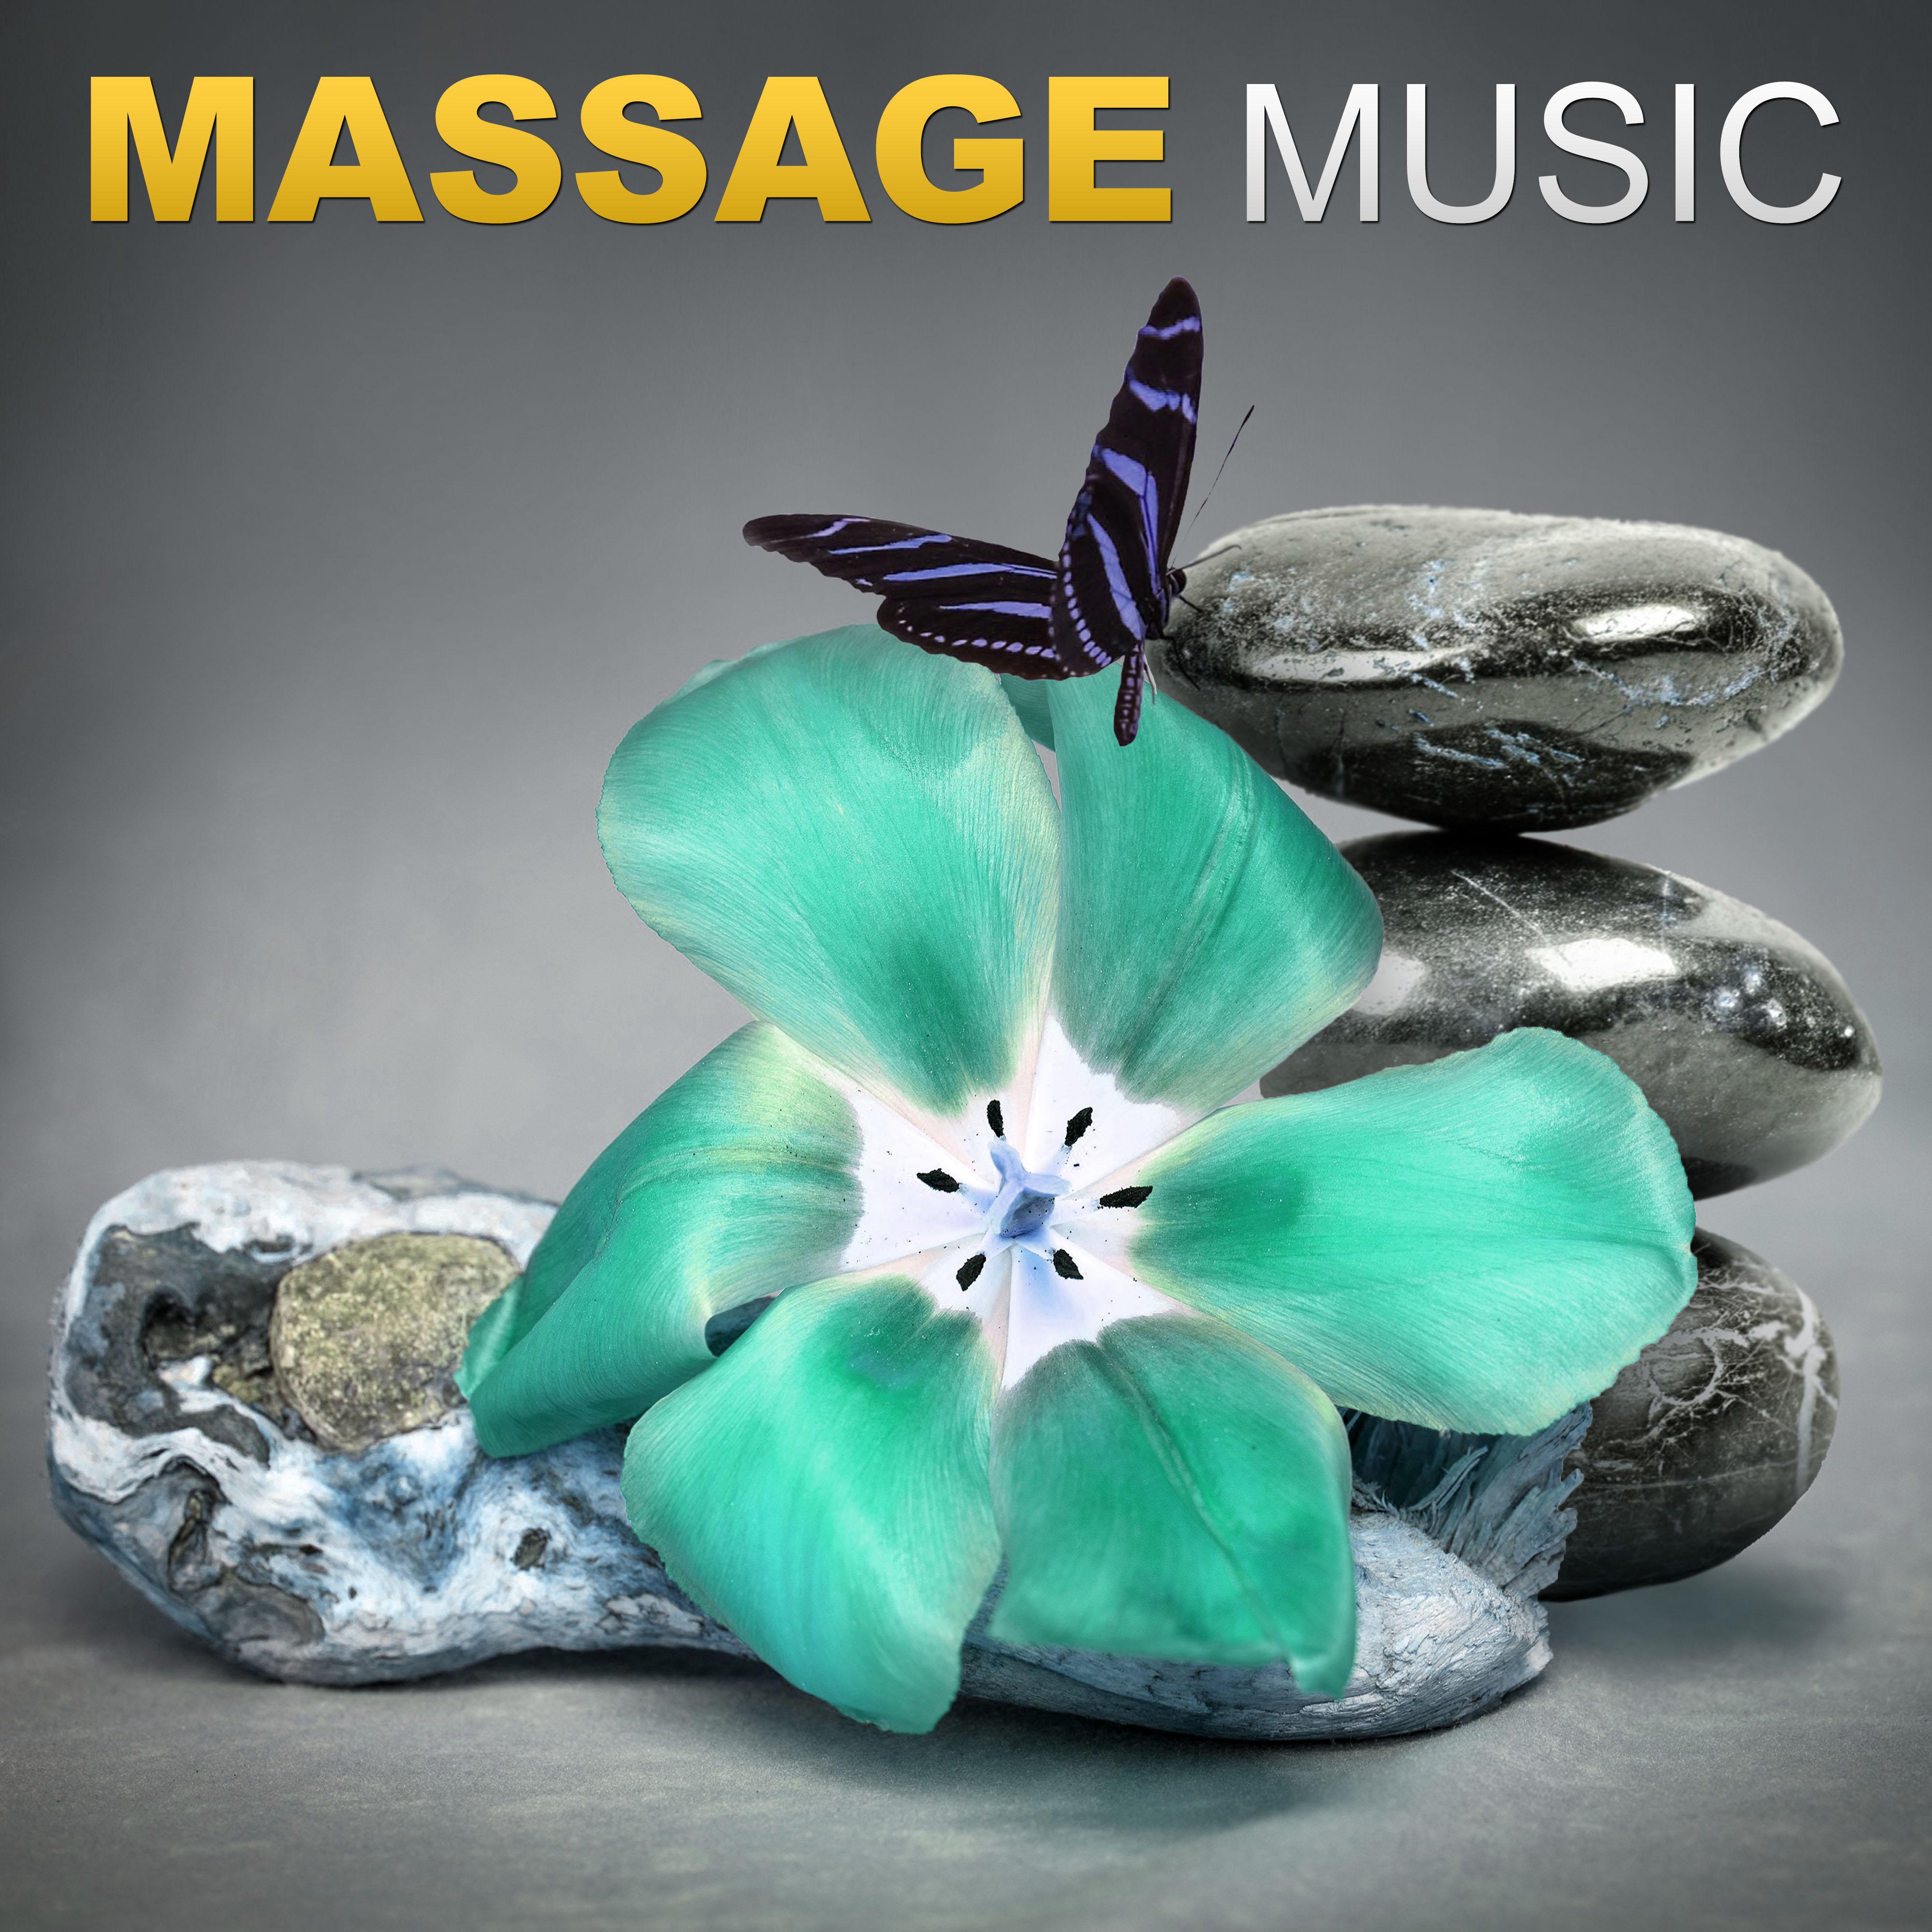 Massage Music – New Age Spa Music, Relaxing Massage, Soft Music to Rest